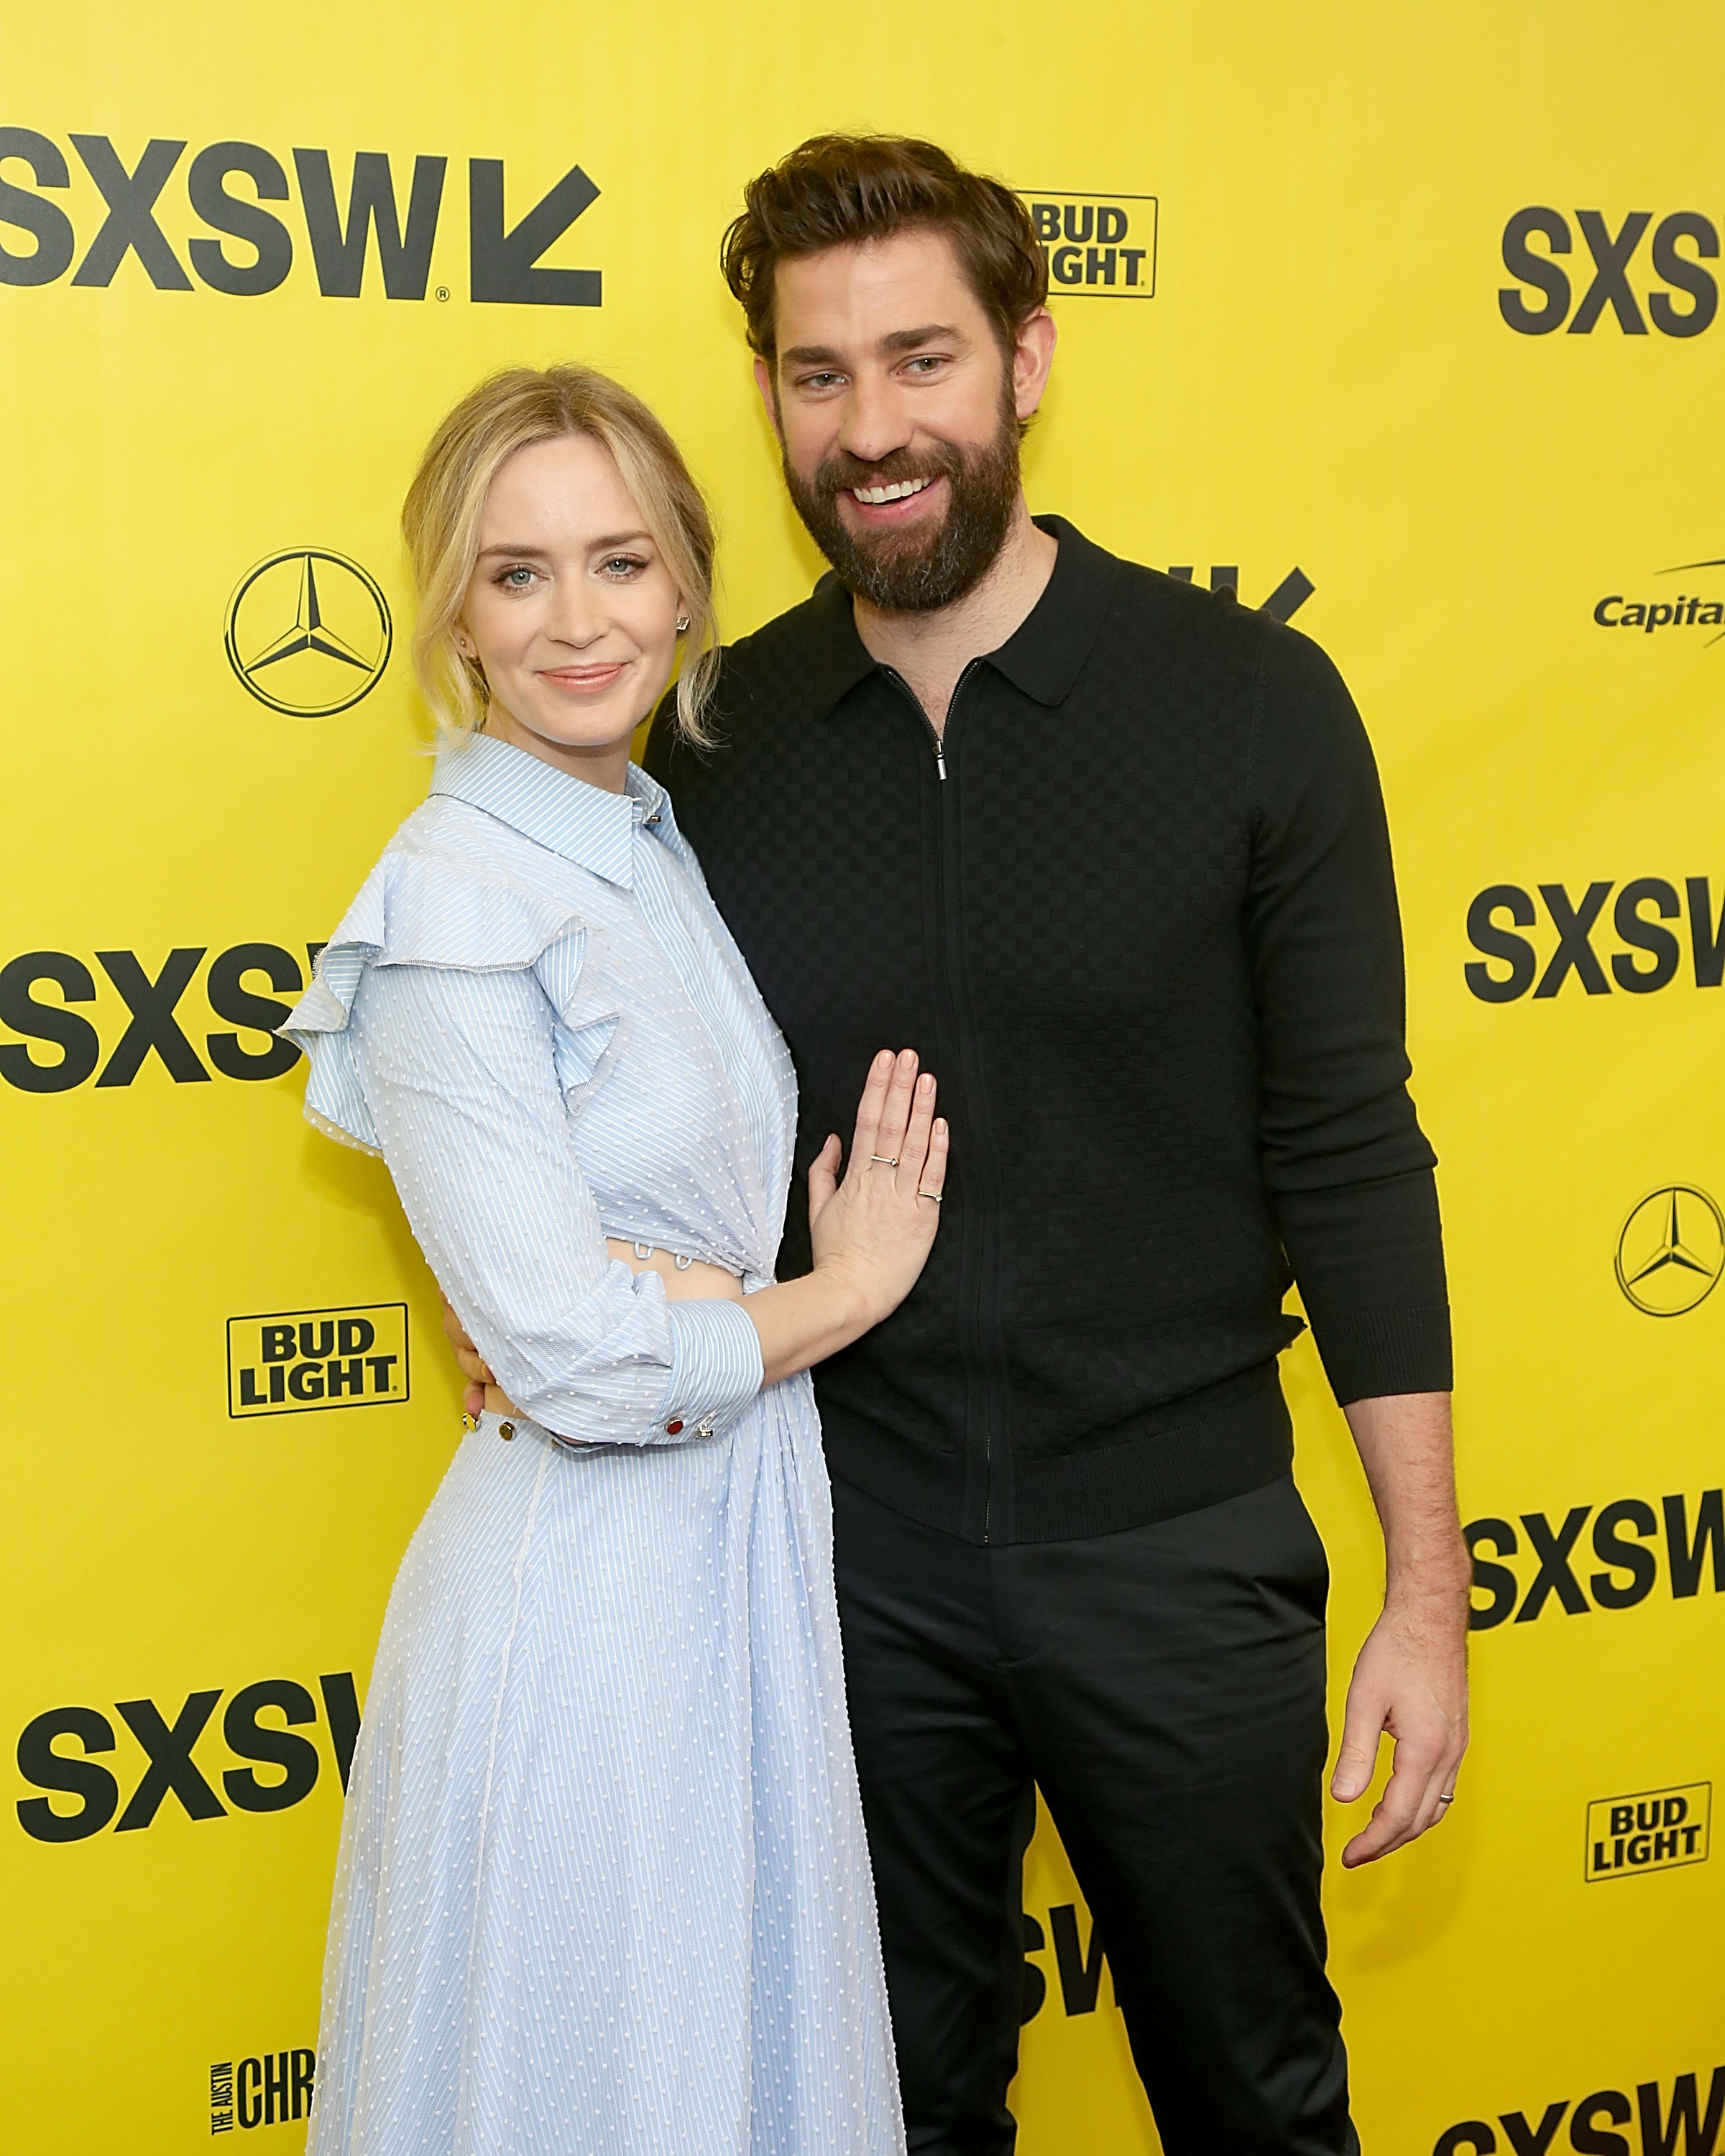 Emily Blunt and John Krasinski attend the screening of "A Quiet Place" during the South By Southwest Conference and Festivals at the Paramount Theatre in Austin, Texas, on March 9, 2018. | Source: Getty Images